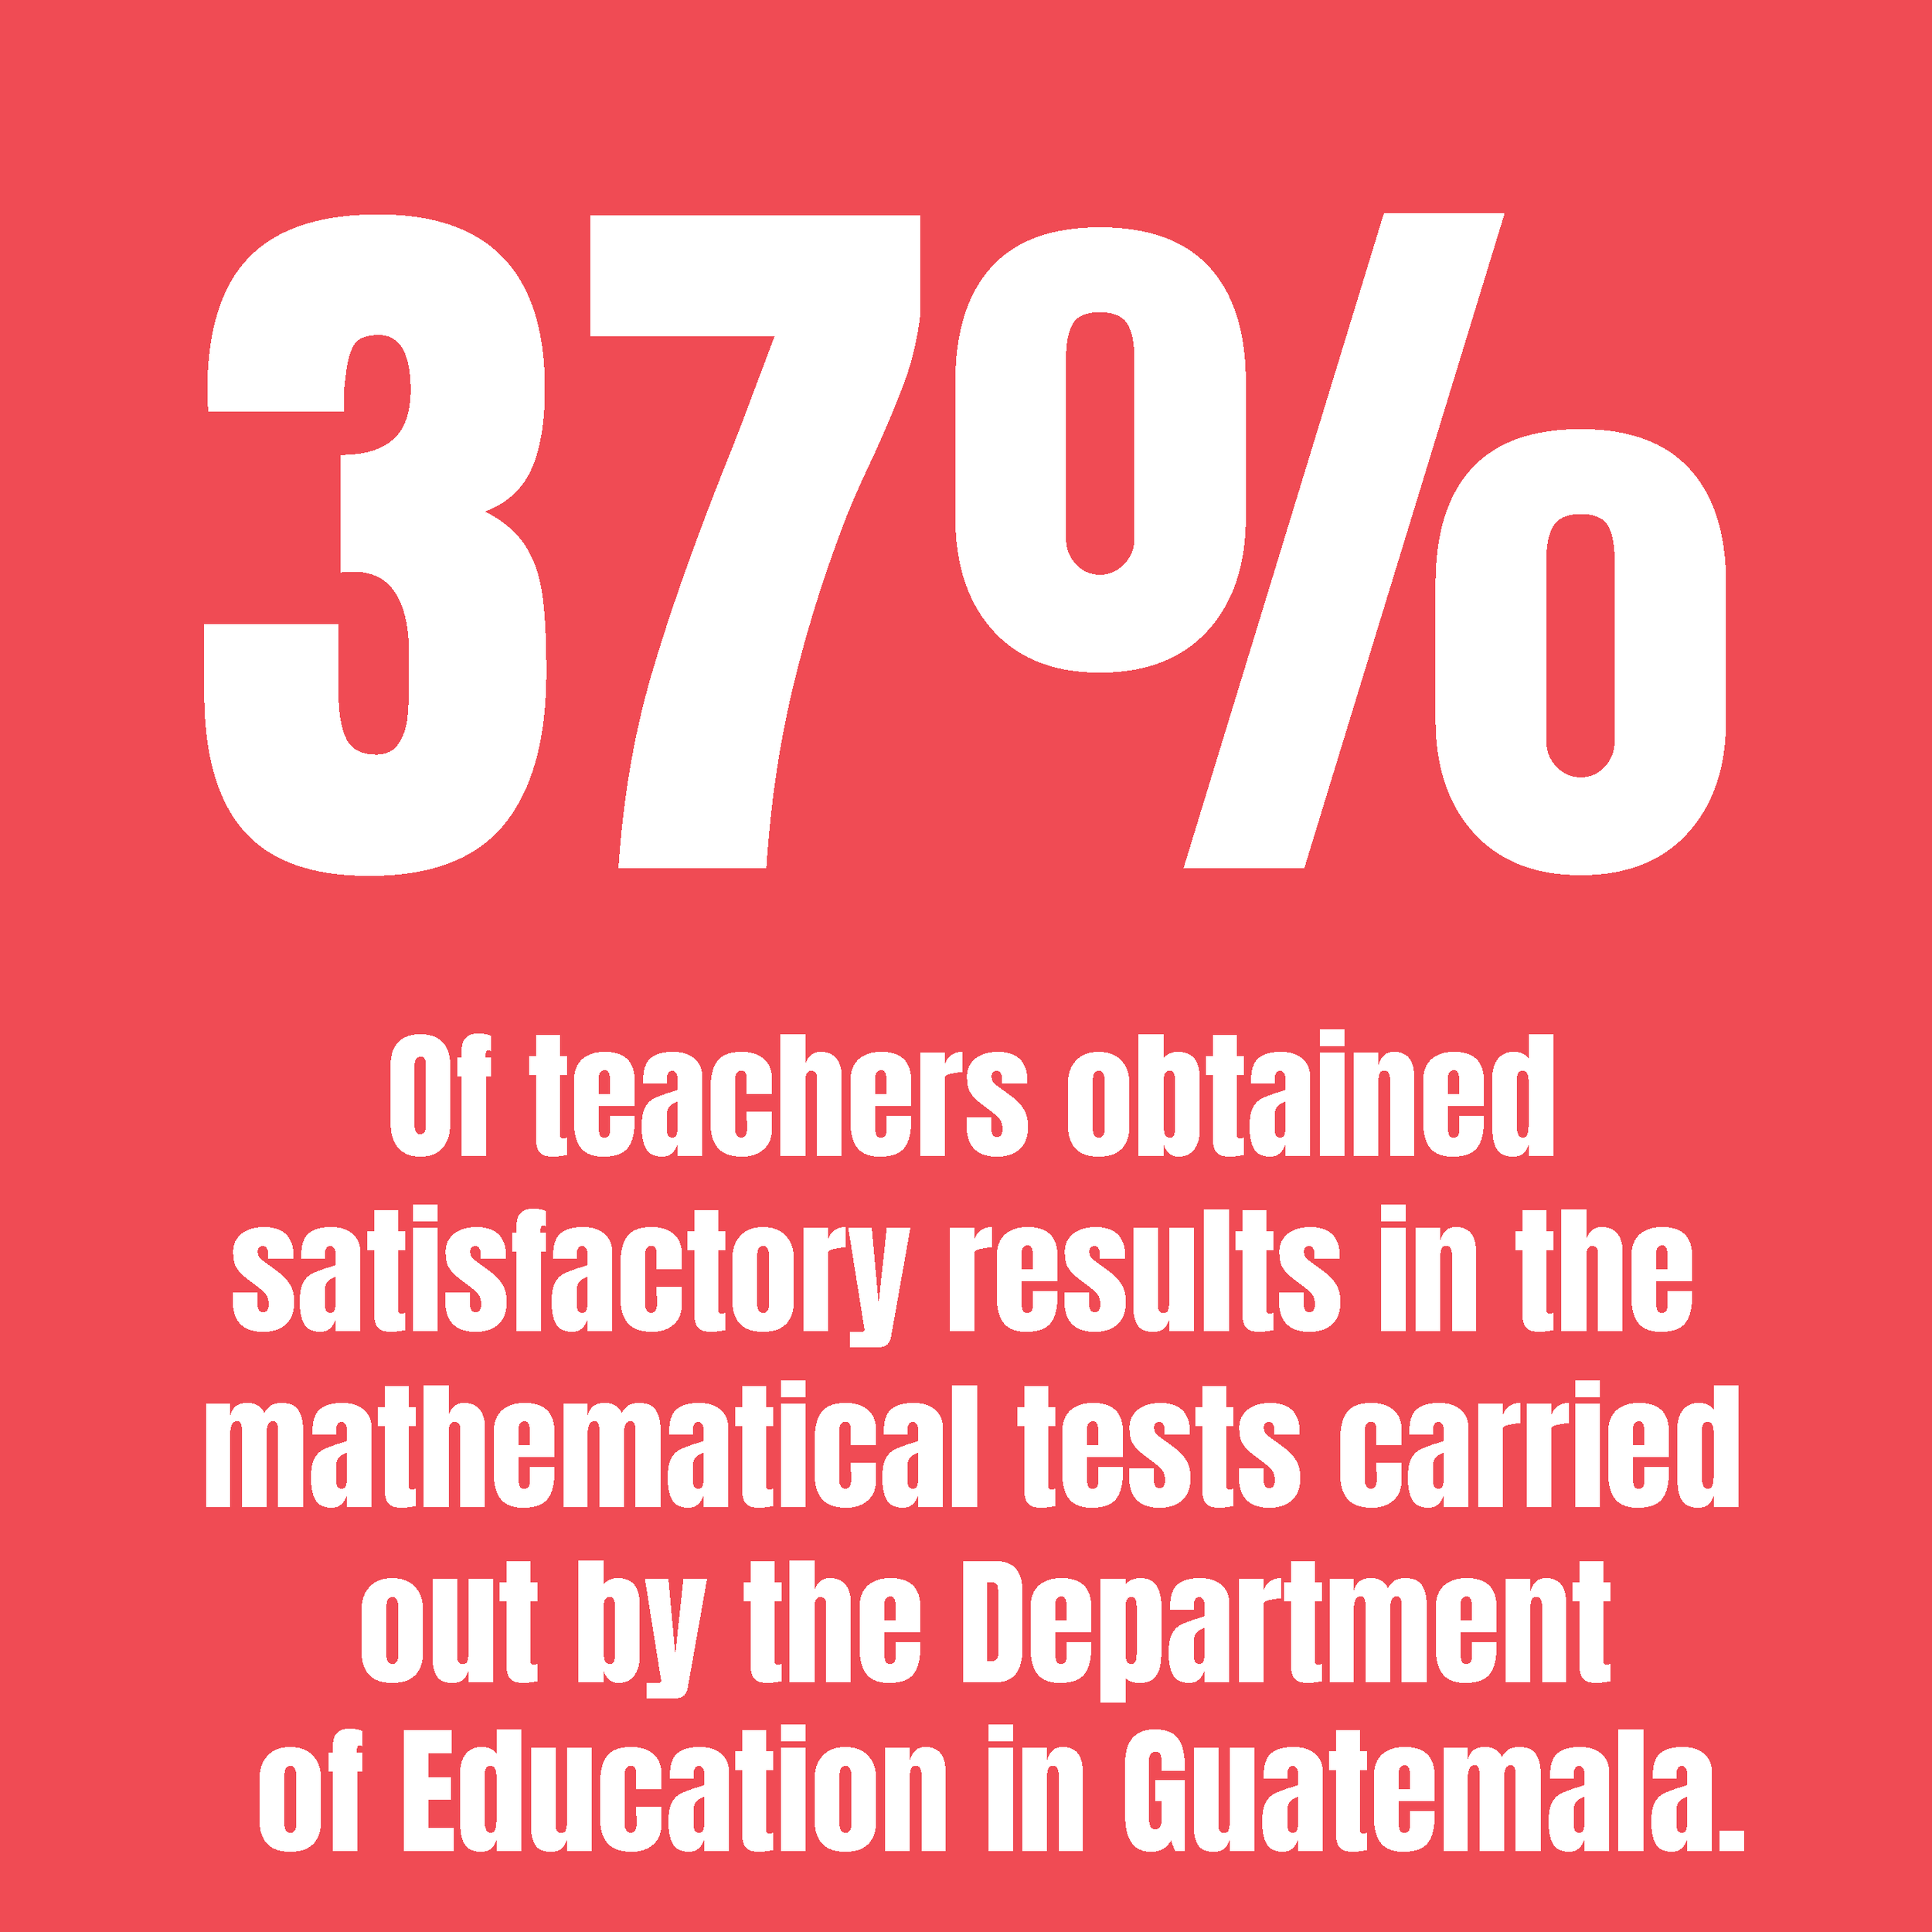  Out of all applicants to current elementary school job openings, only 51% obtained satisfactory results in reading and 37 in math. 